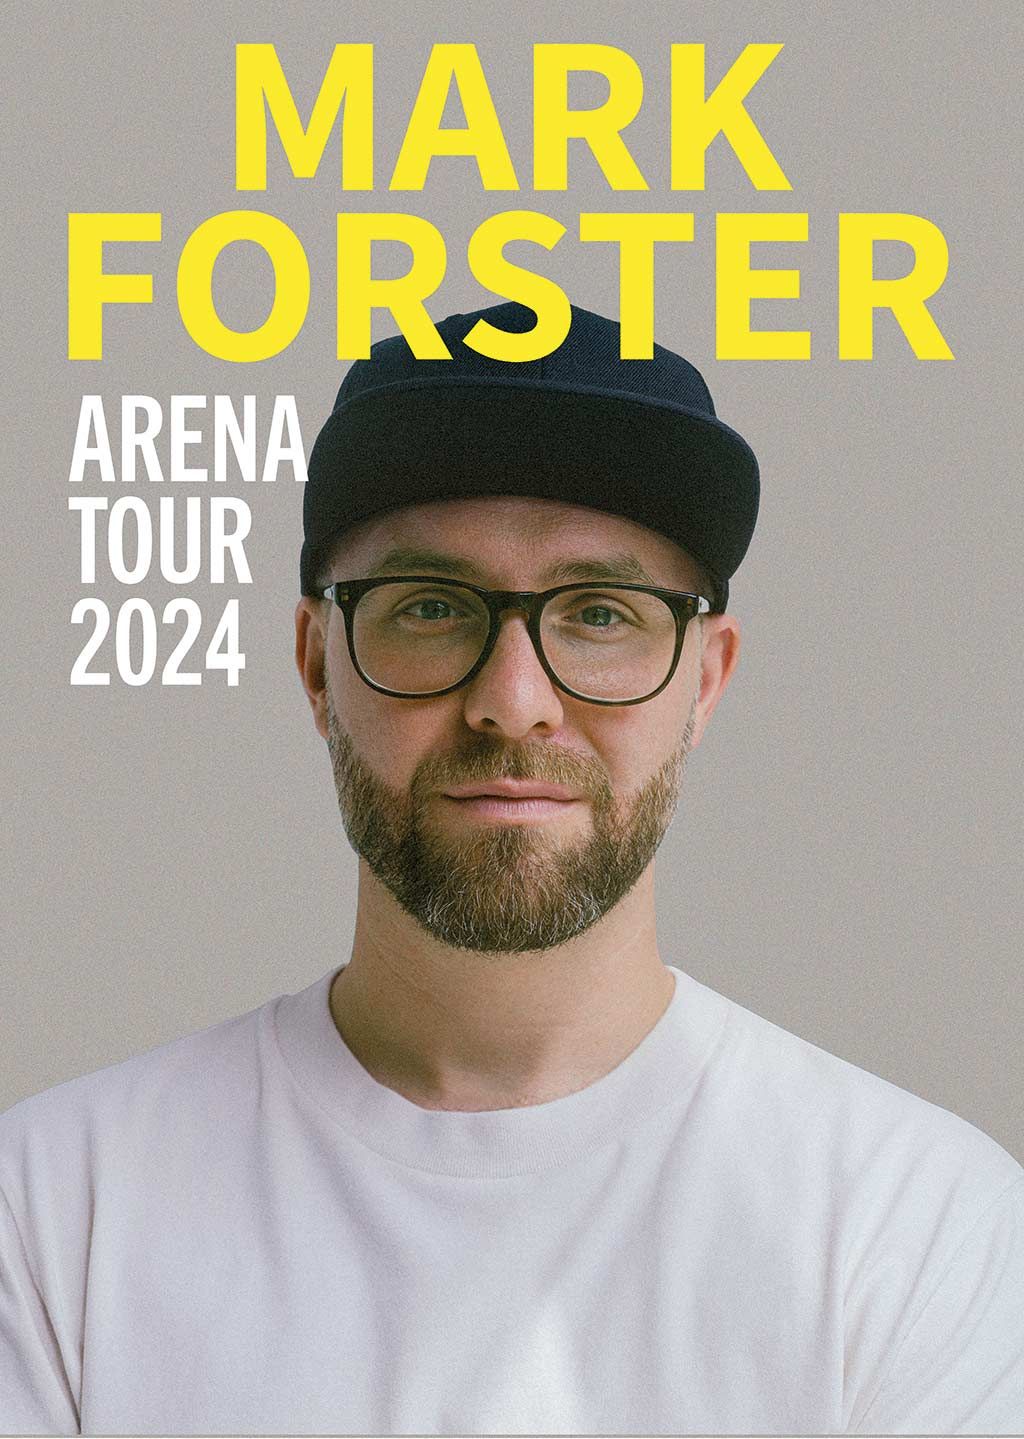 Mark Forster - Arena Tour 2024 at Messe Freiburg Tickets